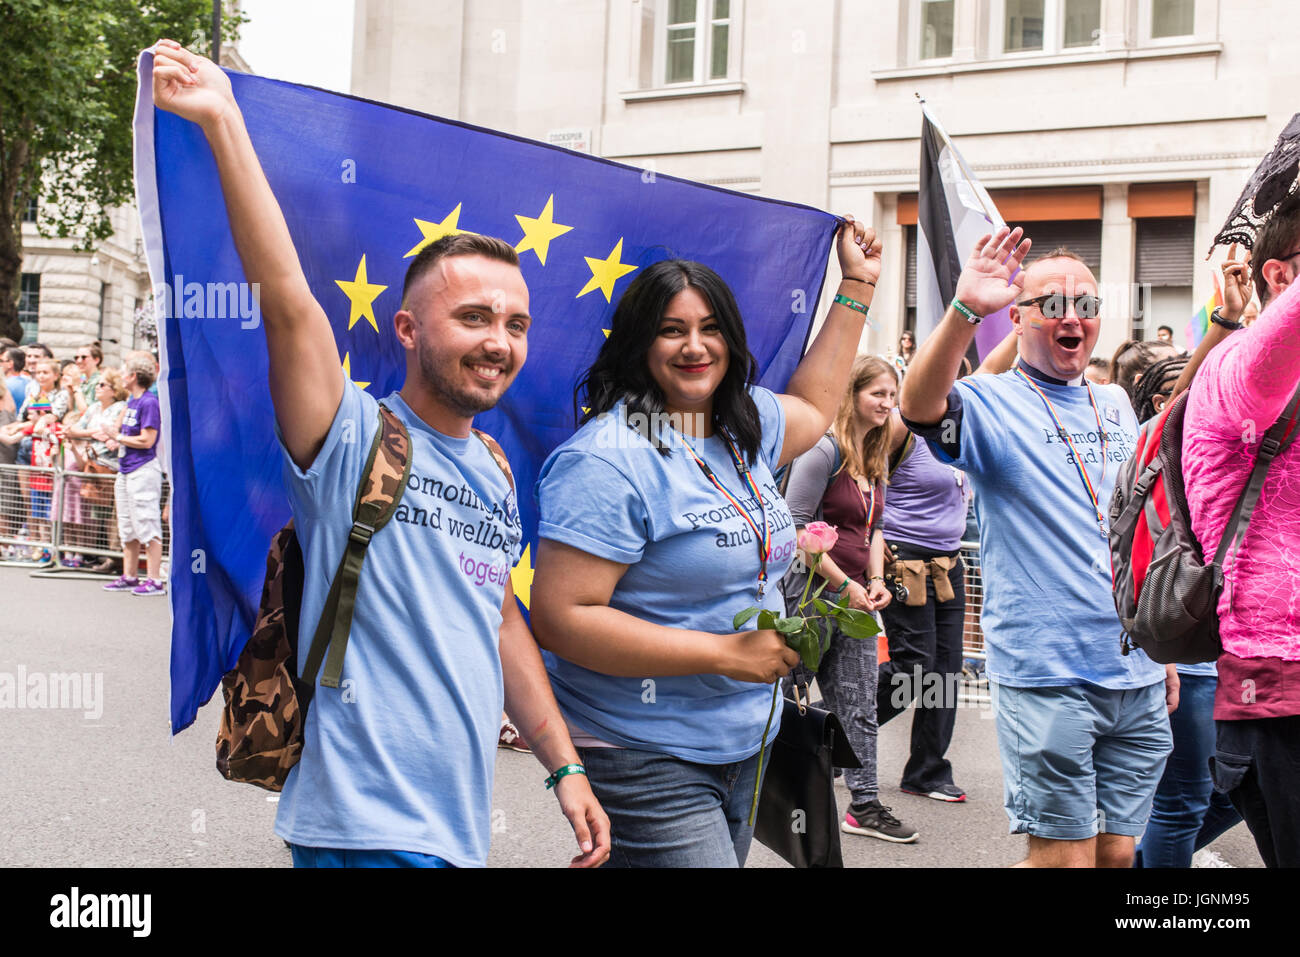 London, UK. 8th July, 2017. People holding EU flag during the parade at Pride London 2017. .Thousand of people join the annual LGBT  parade through the capital. Credit: Nicola Ferrari/Alamy Live News Stock Photo